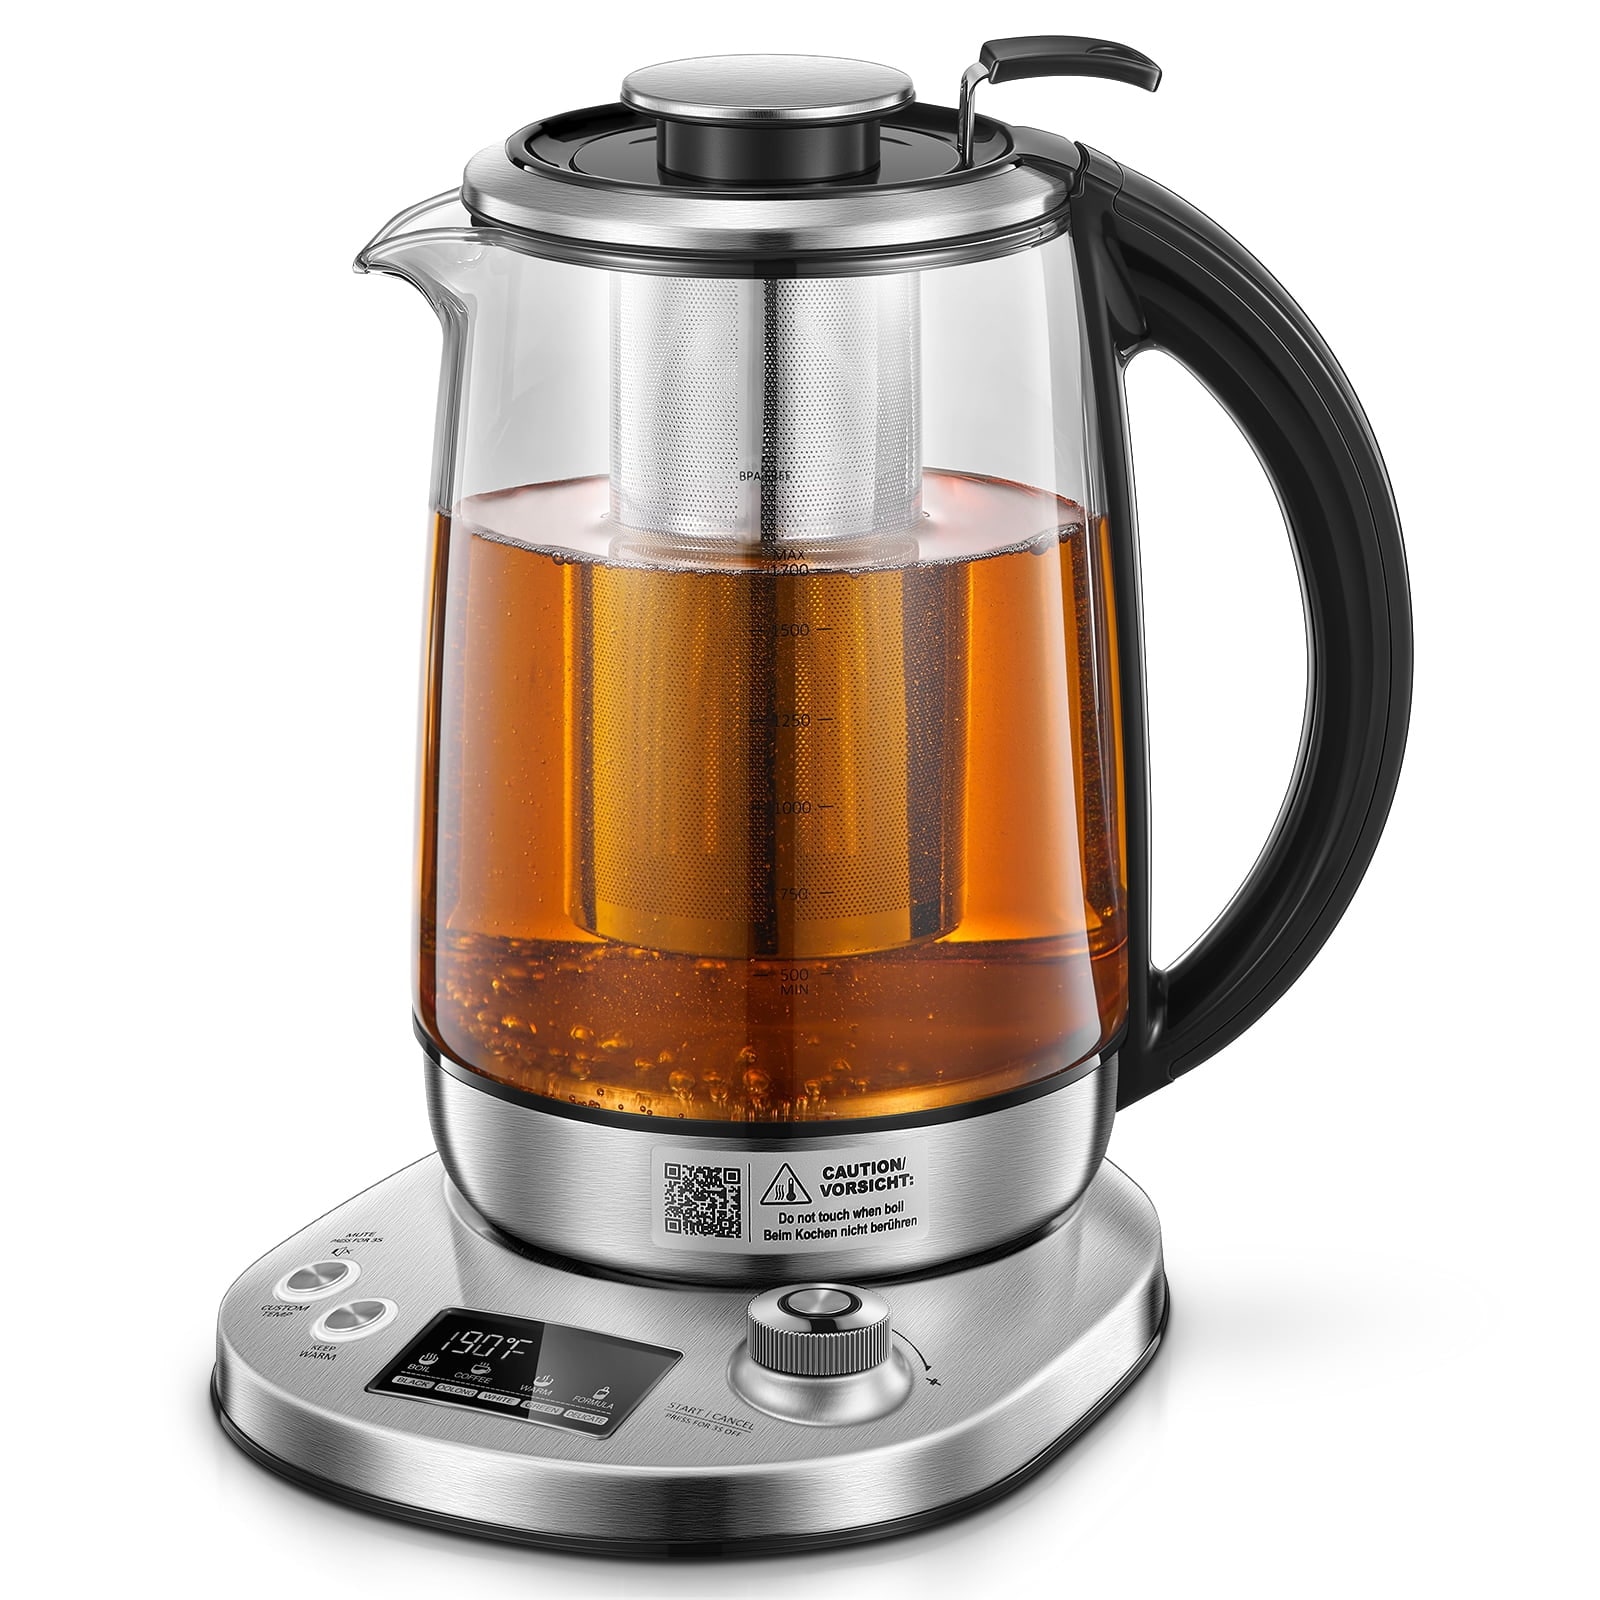 Cuisinart 1.7-Liter Stainless Steel Cordless Electric Kettle with 6 Preset  Temperatures